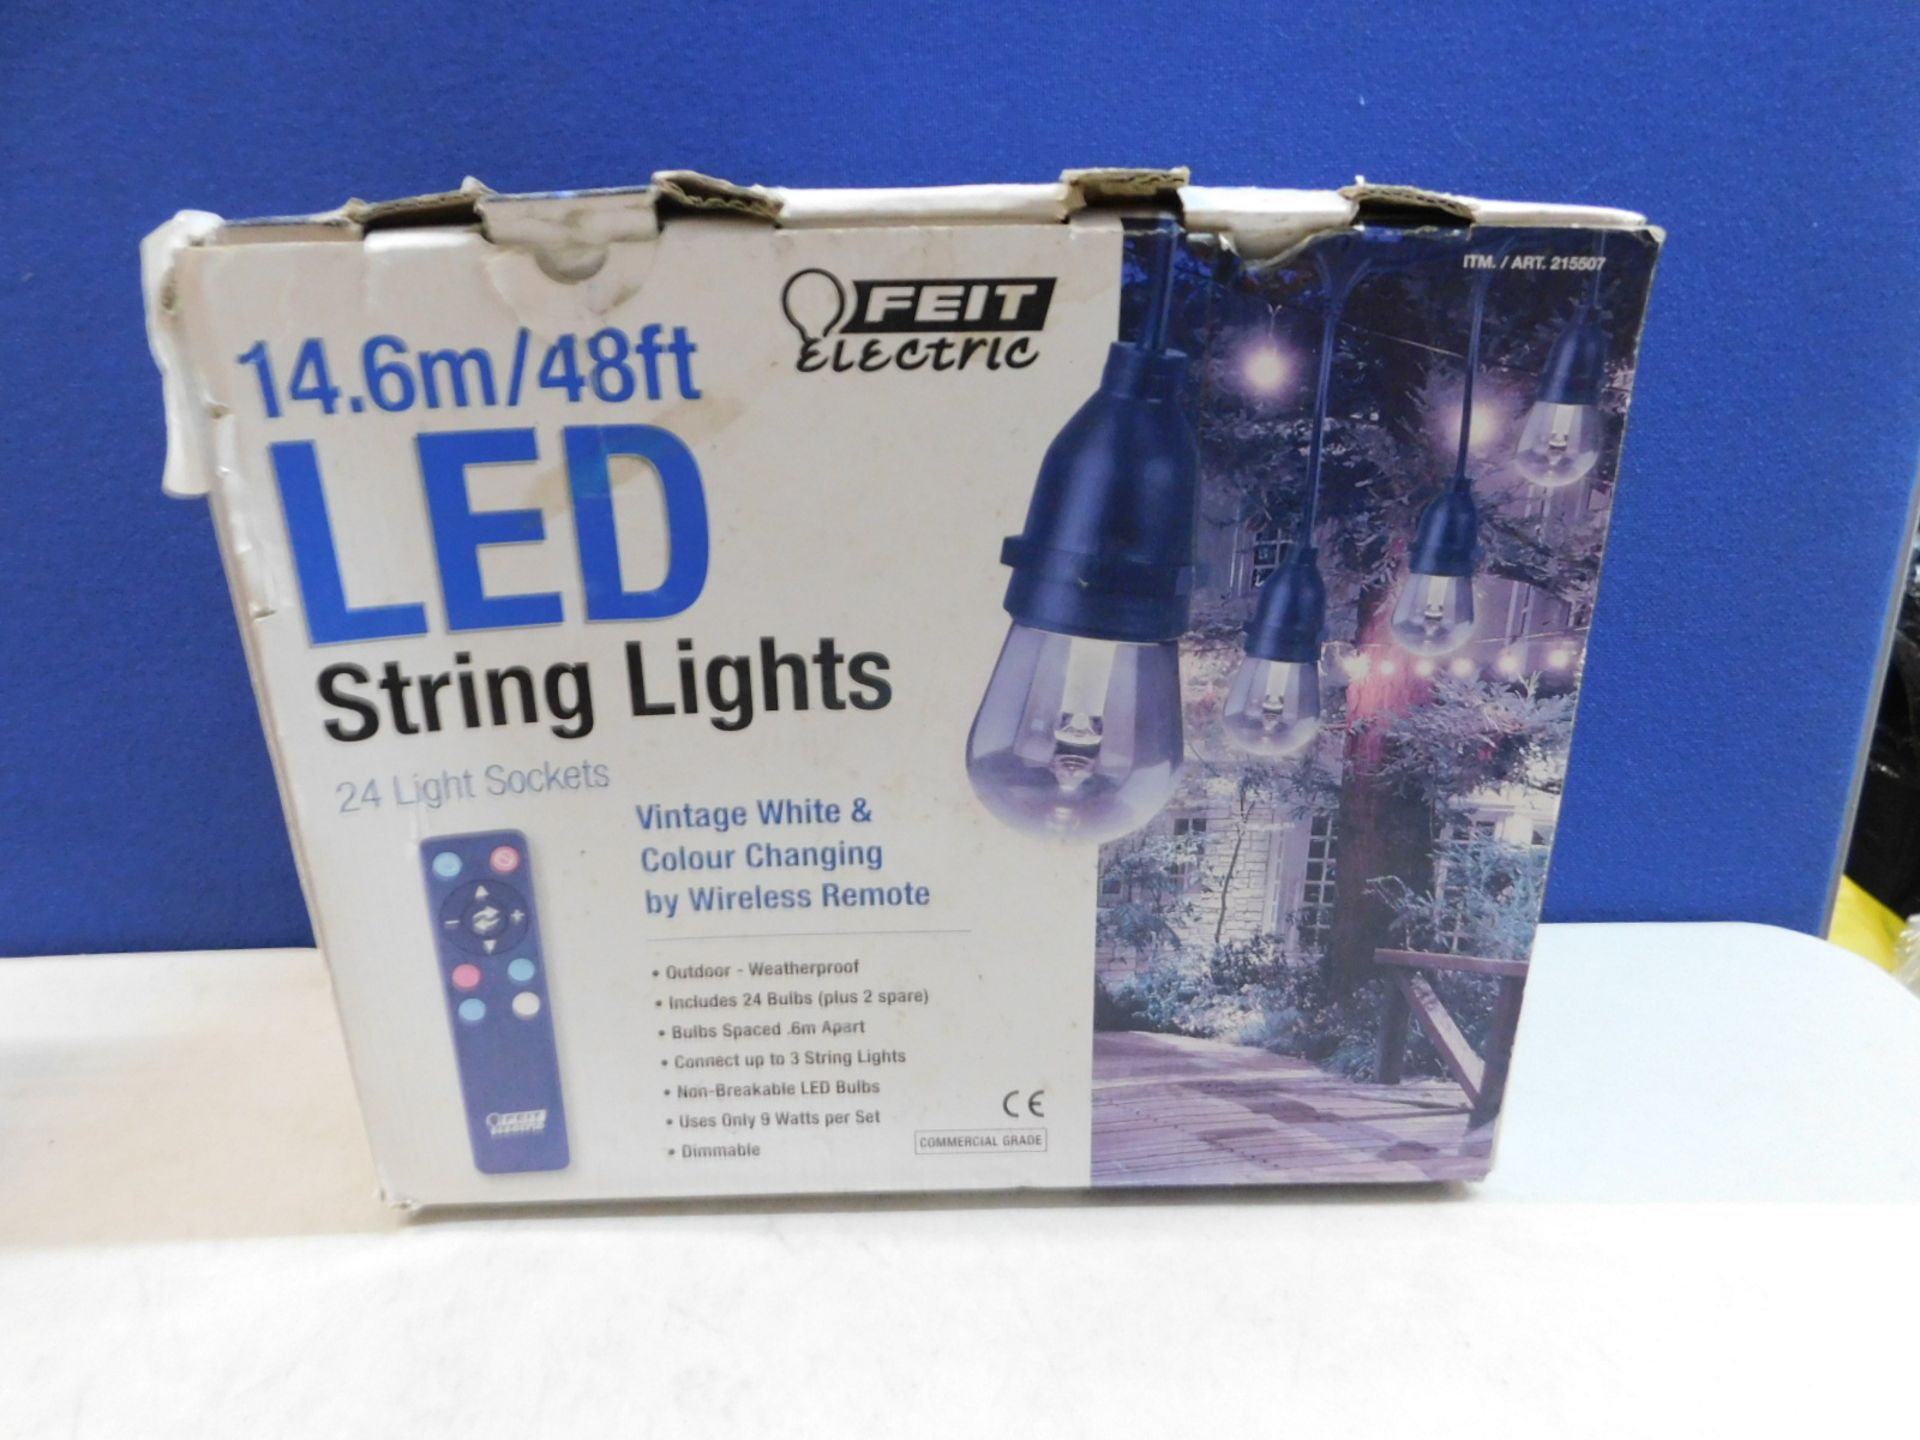 1 SET OF FEIT ELECTRIC INDOOR/OUTDOOR 48FT COLOUR CHANGING STRING LIGHTS RRP Â£89.99